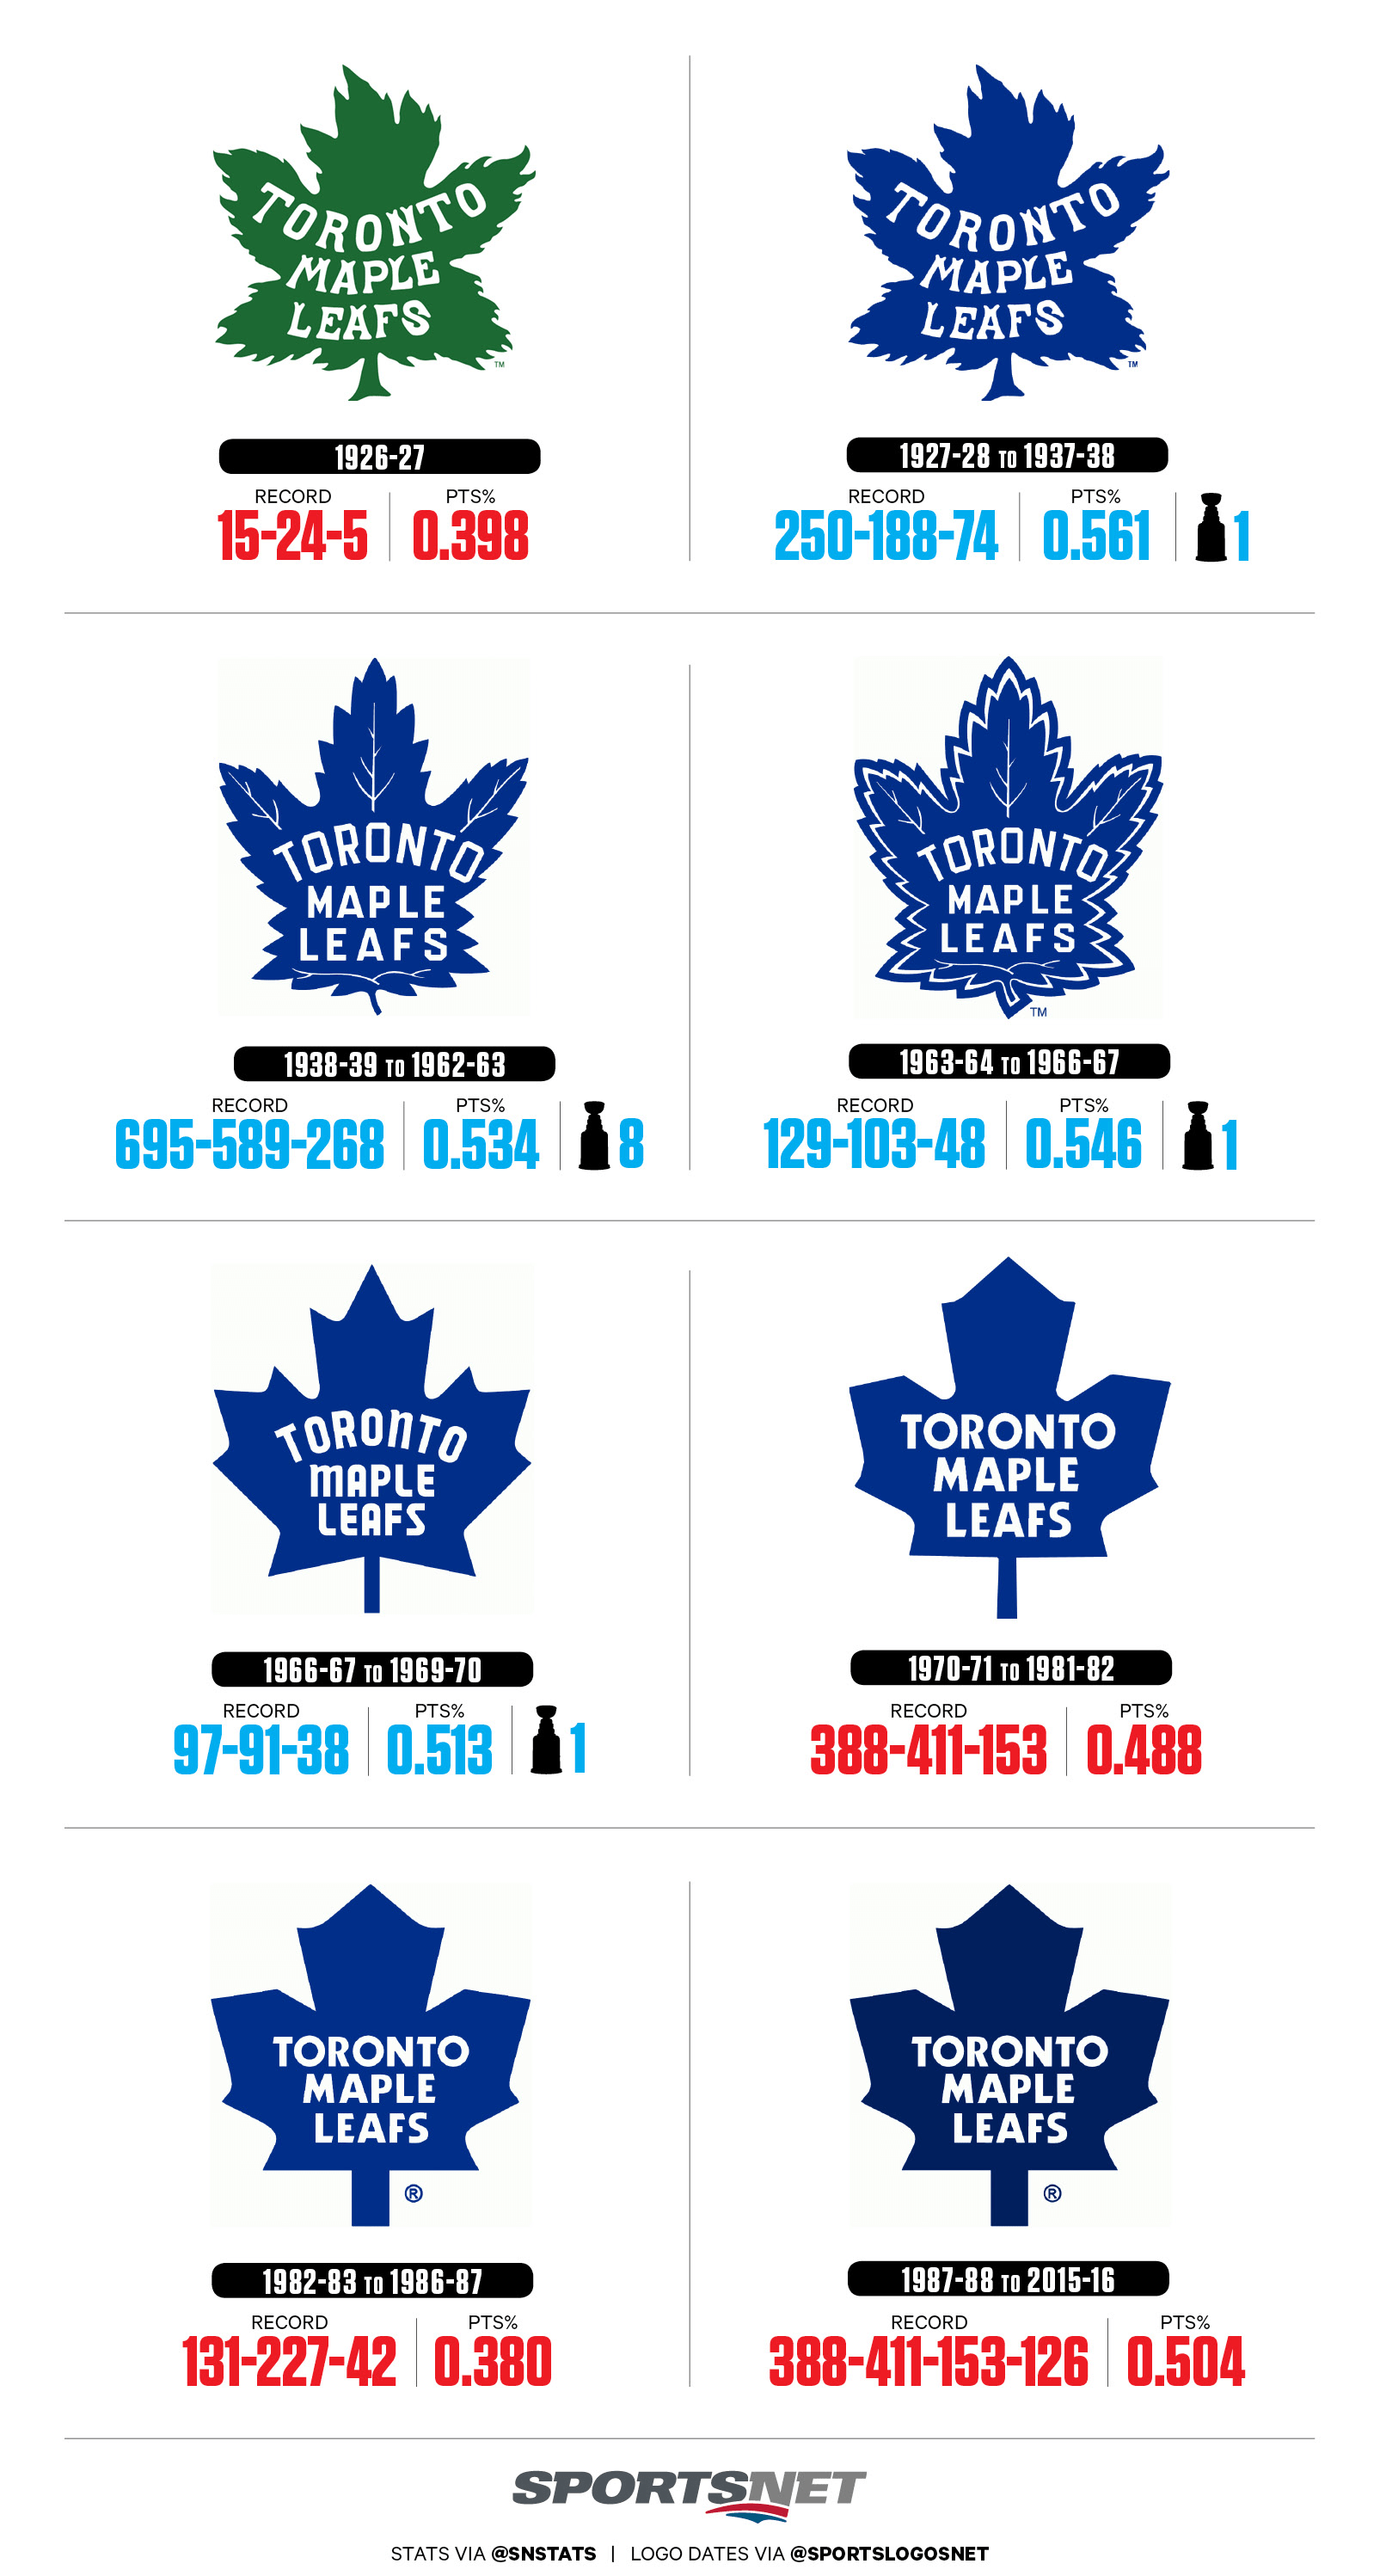 Toronto Maple Leafs Logo - Twitter reaction to Maple Leafs unveiling new logo - Sportsnet.ca